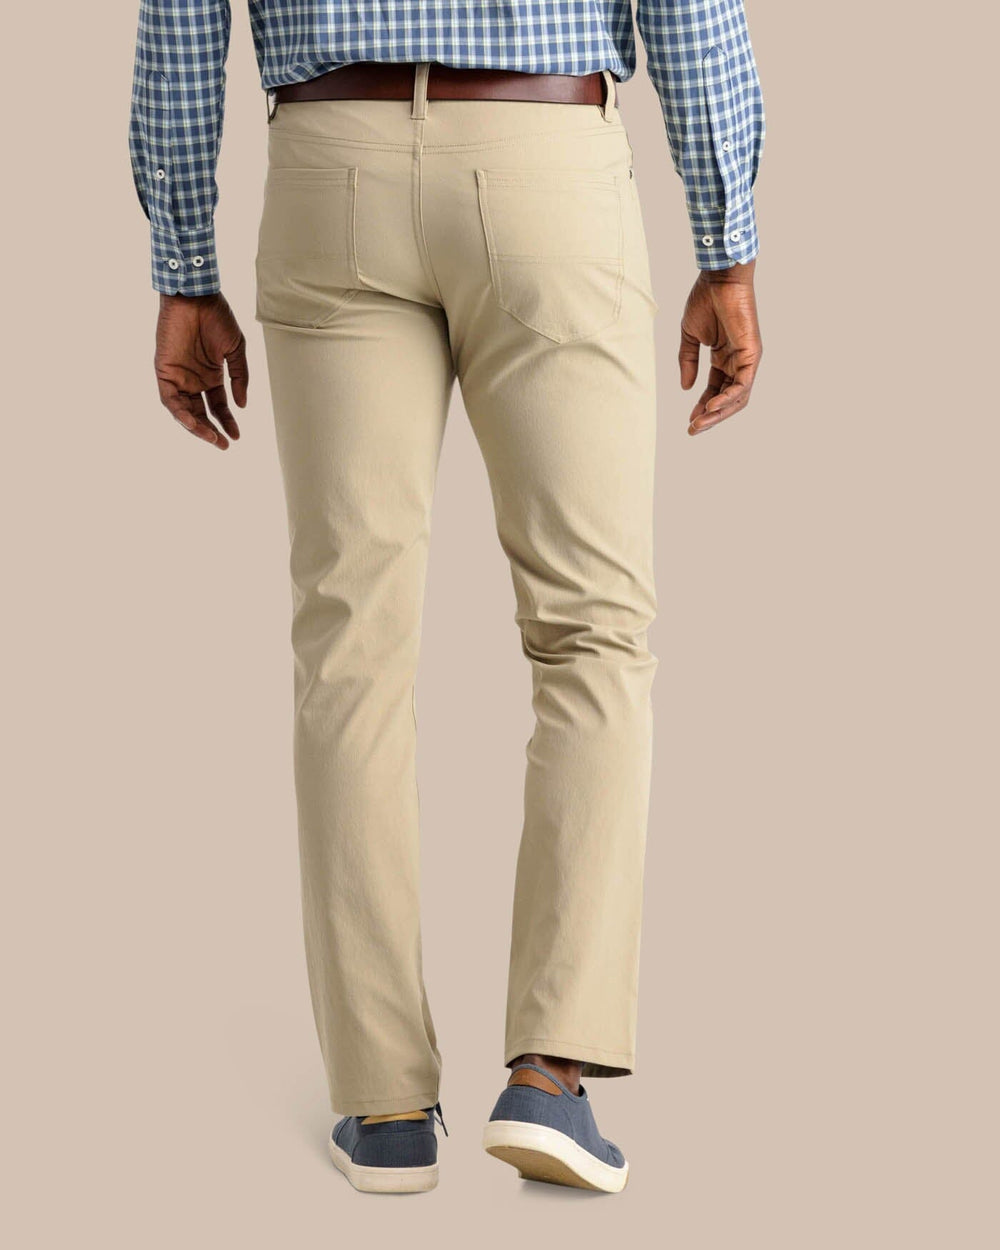 The back view of the Southern Tide Intercoastal Performance Pant by Southern Tide - Sandstone Khaki